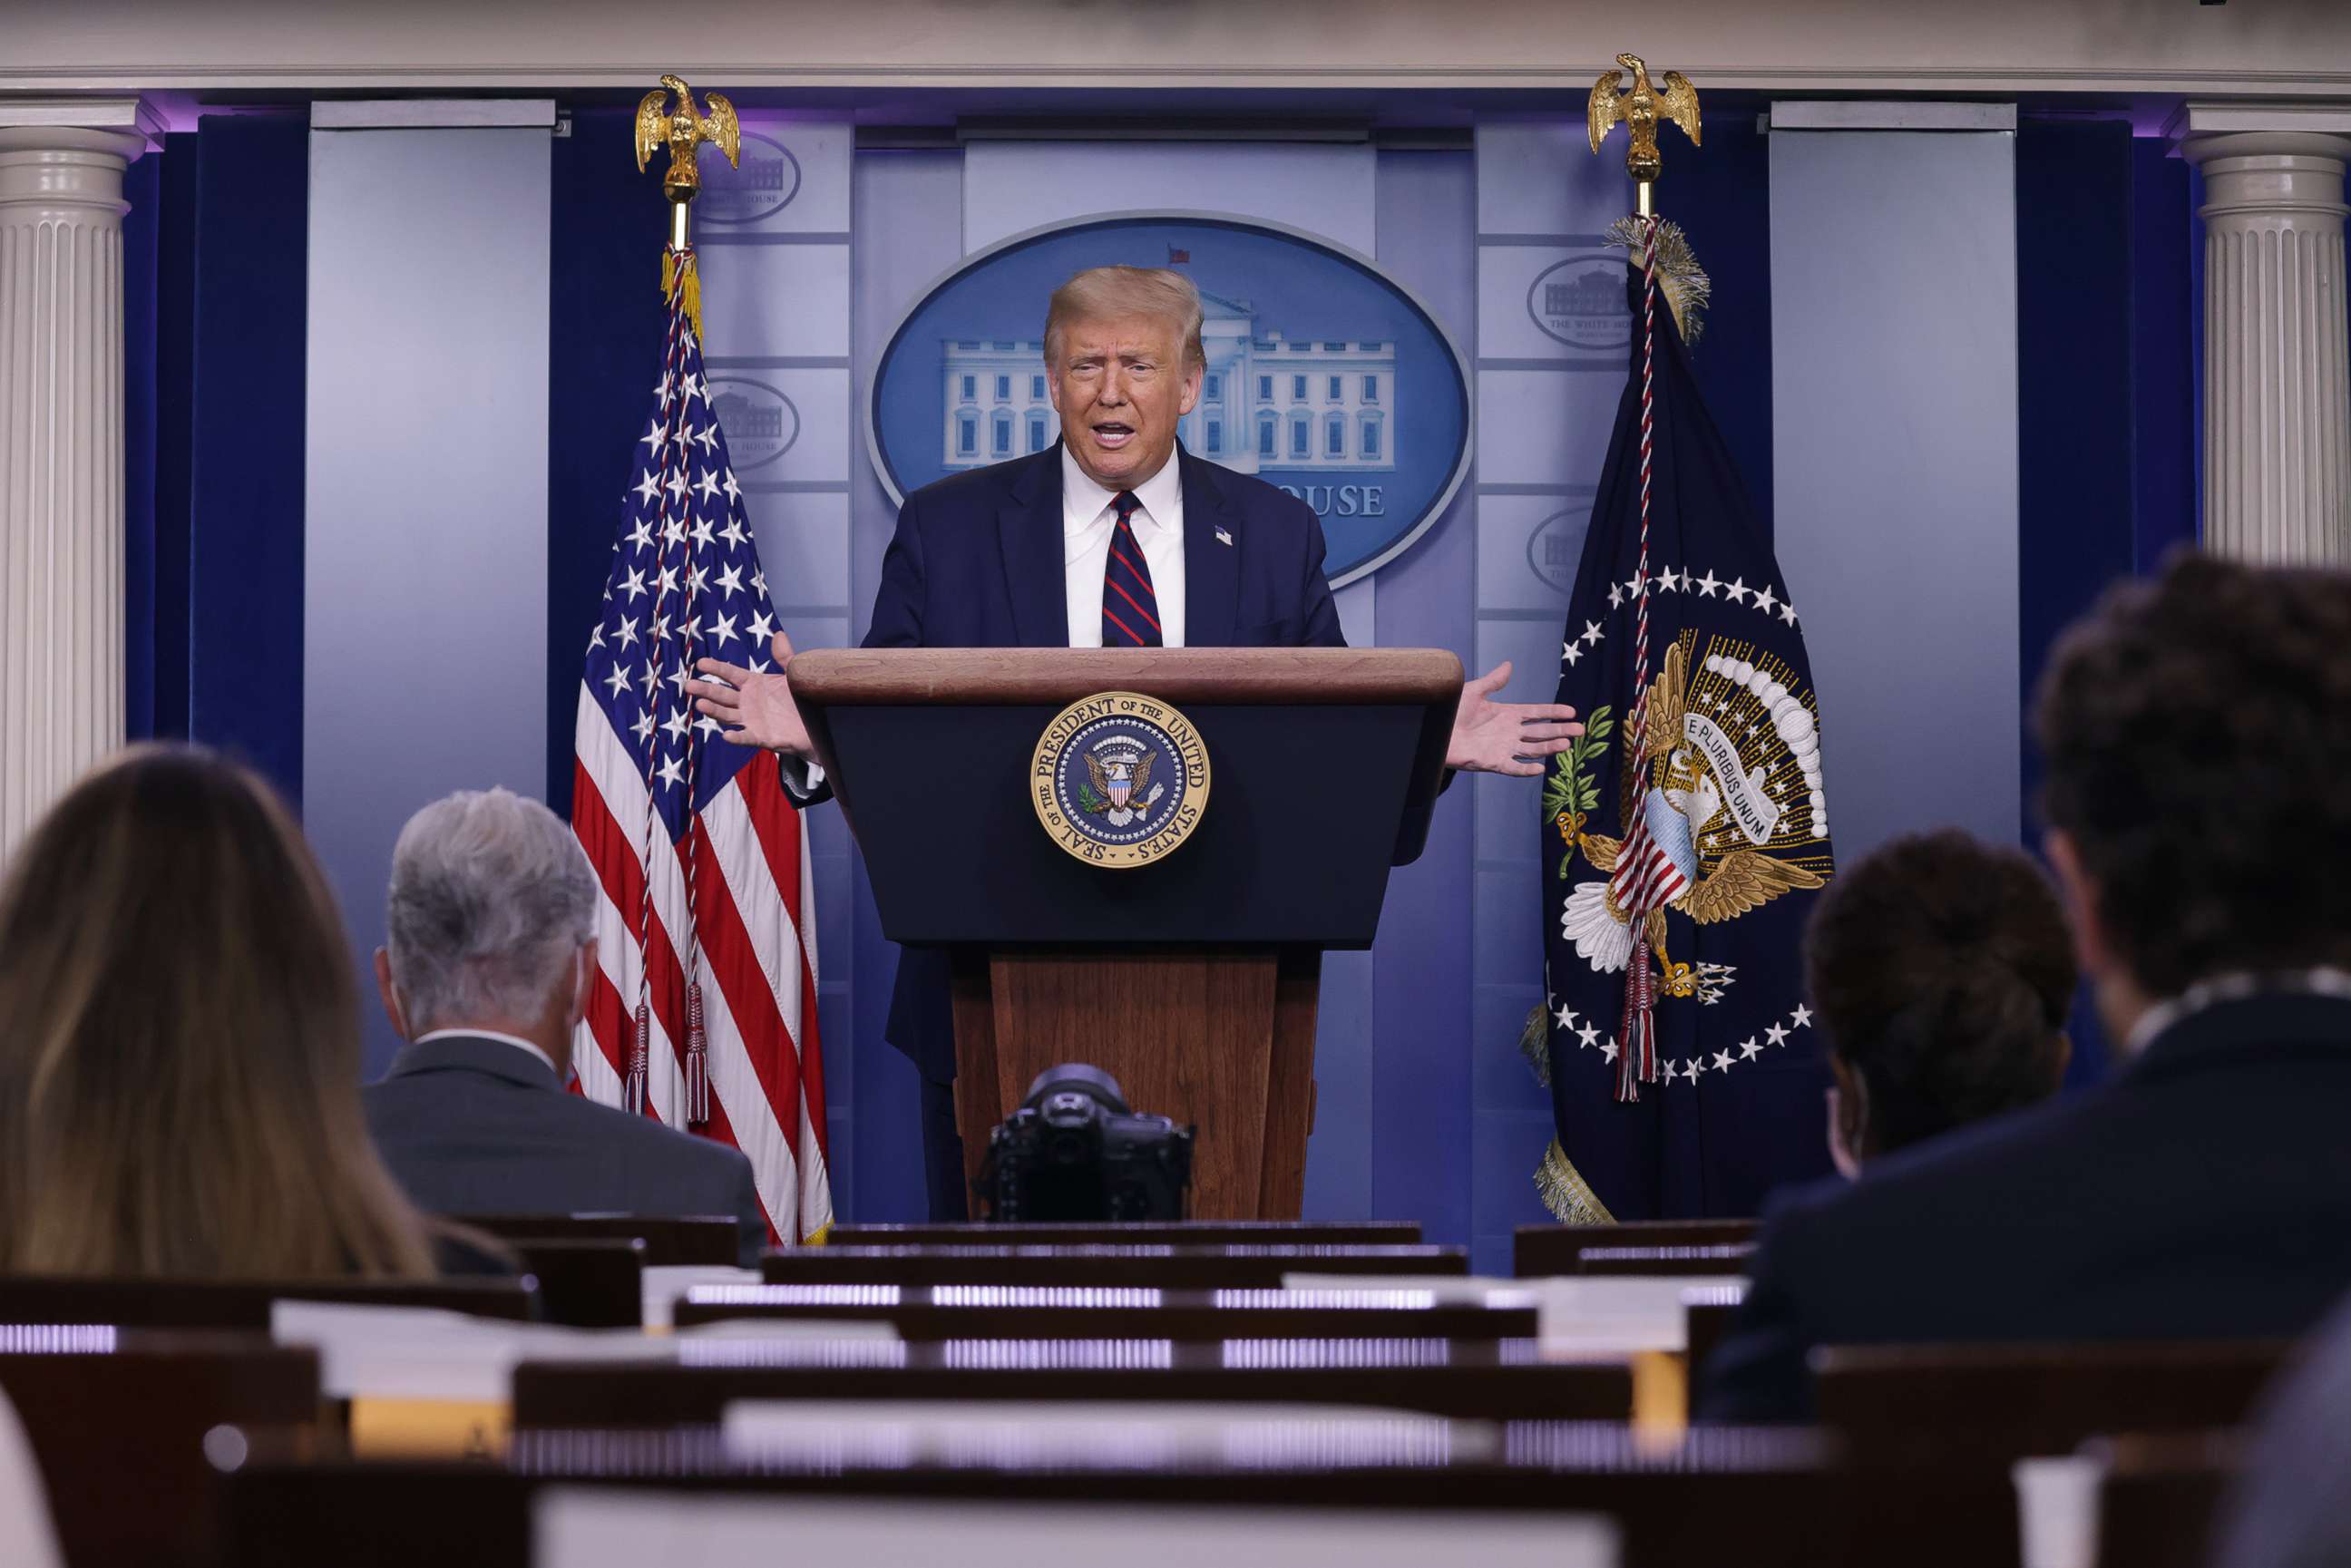 PHOTO: President Donald Trump speaks during a news conference in the James Brady Briefing Room of the White House, July 30, 2020.